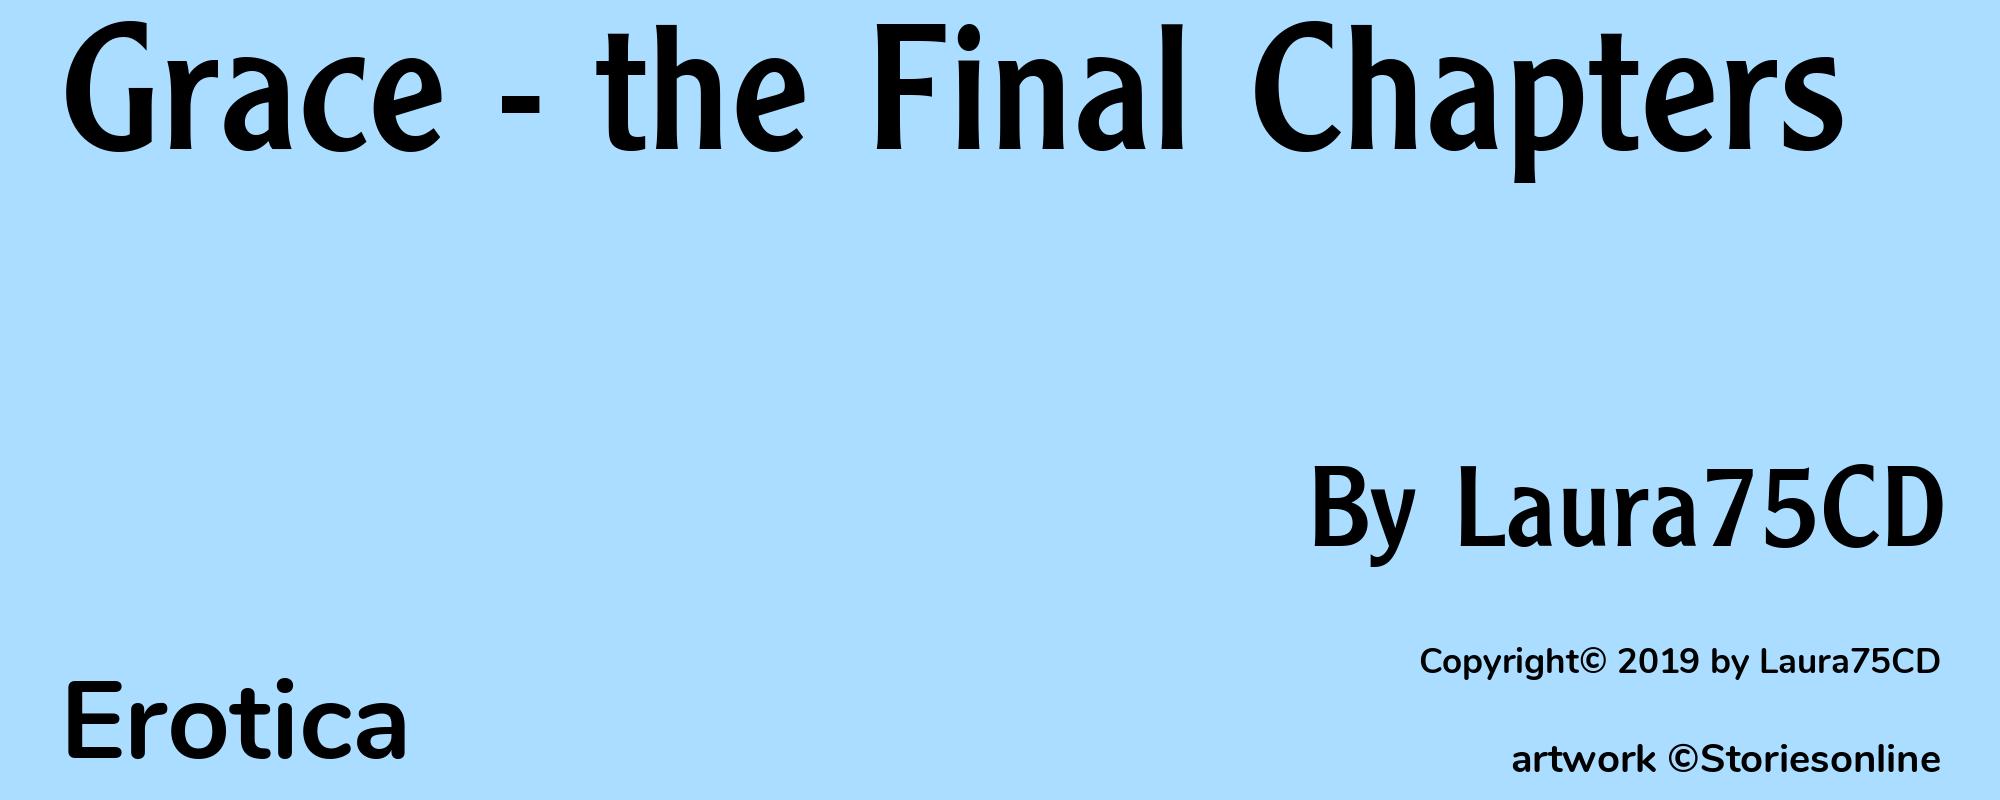 Grace - the Final Chapters - Cover